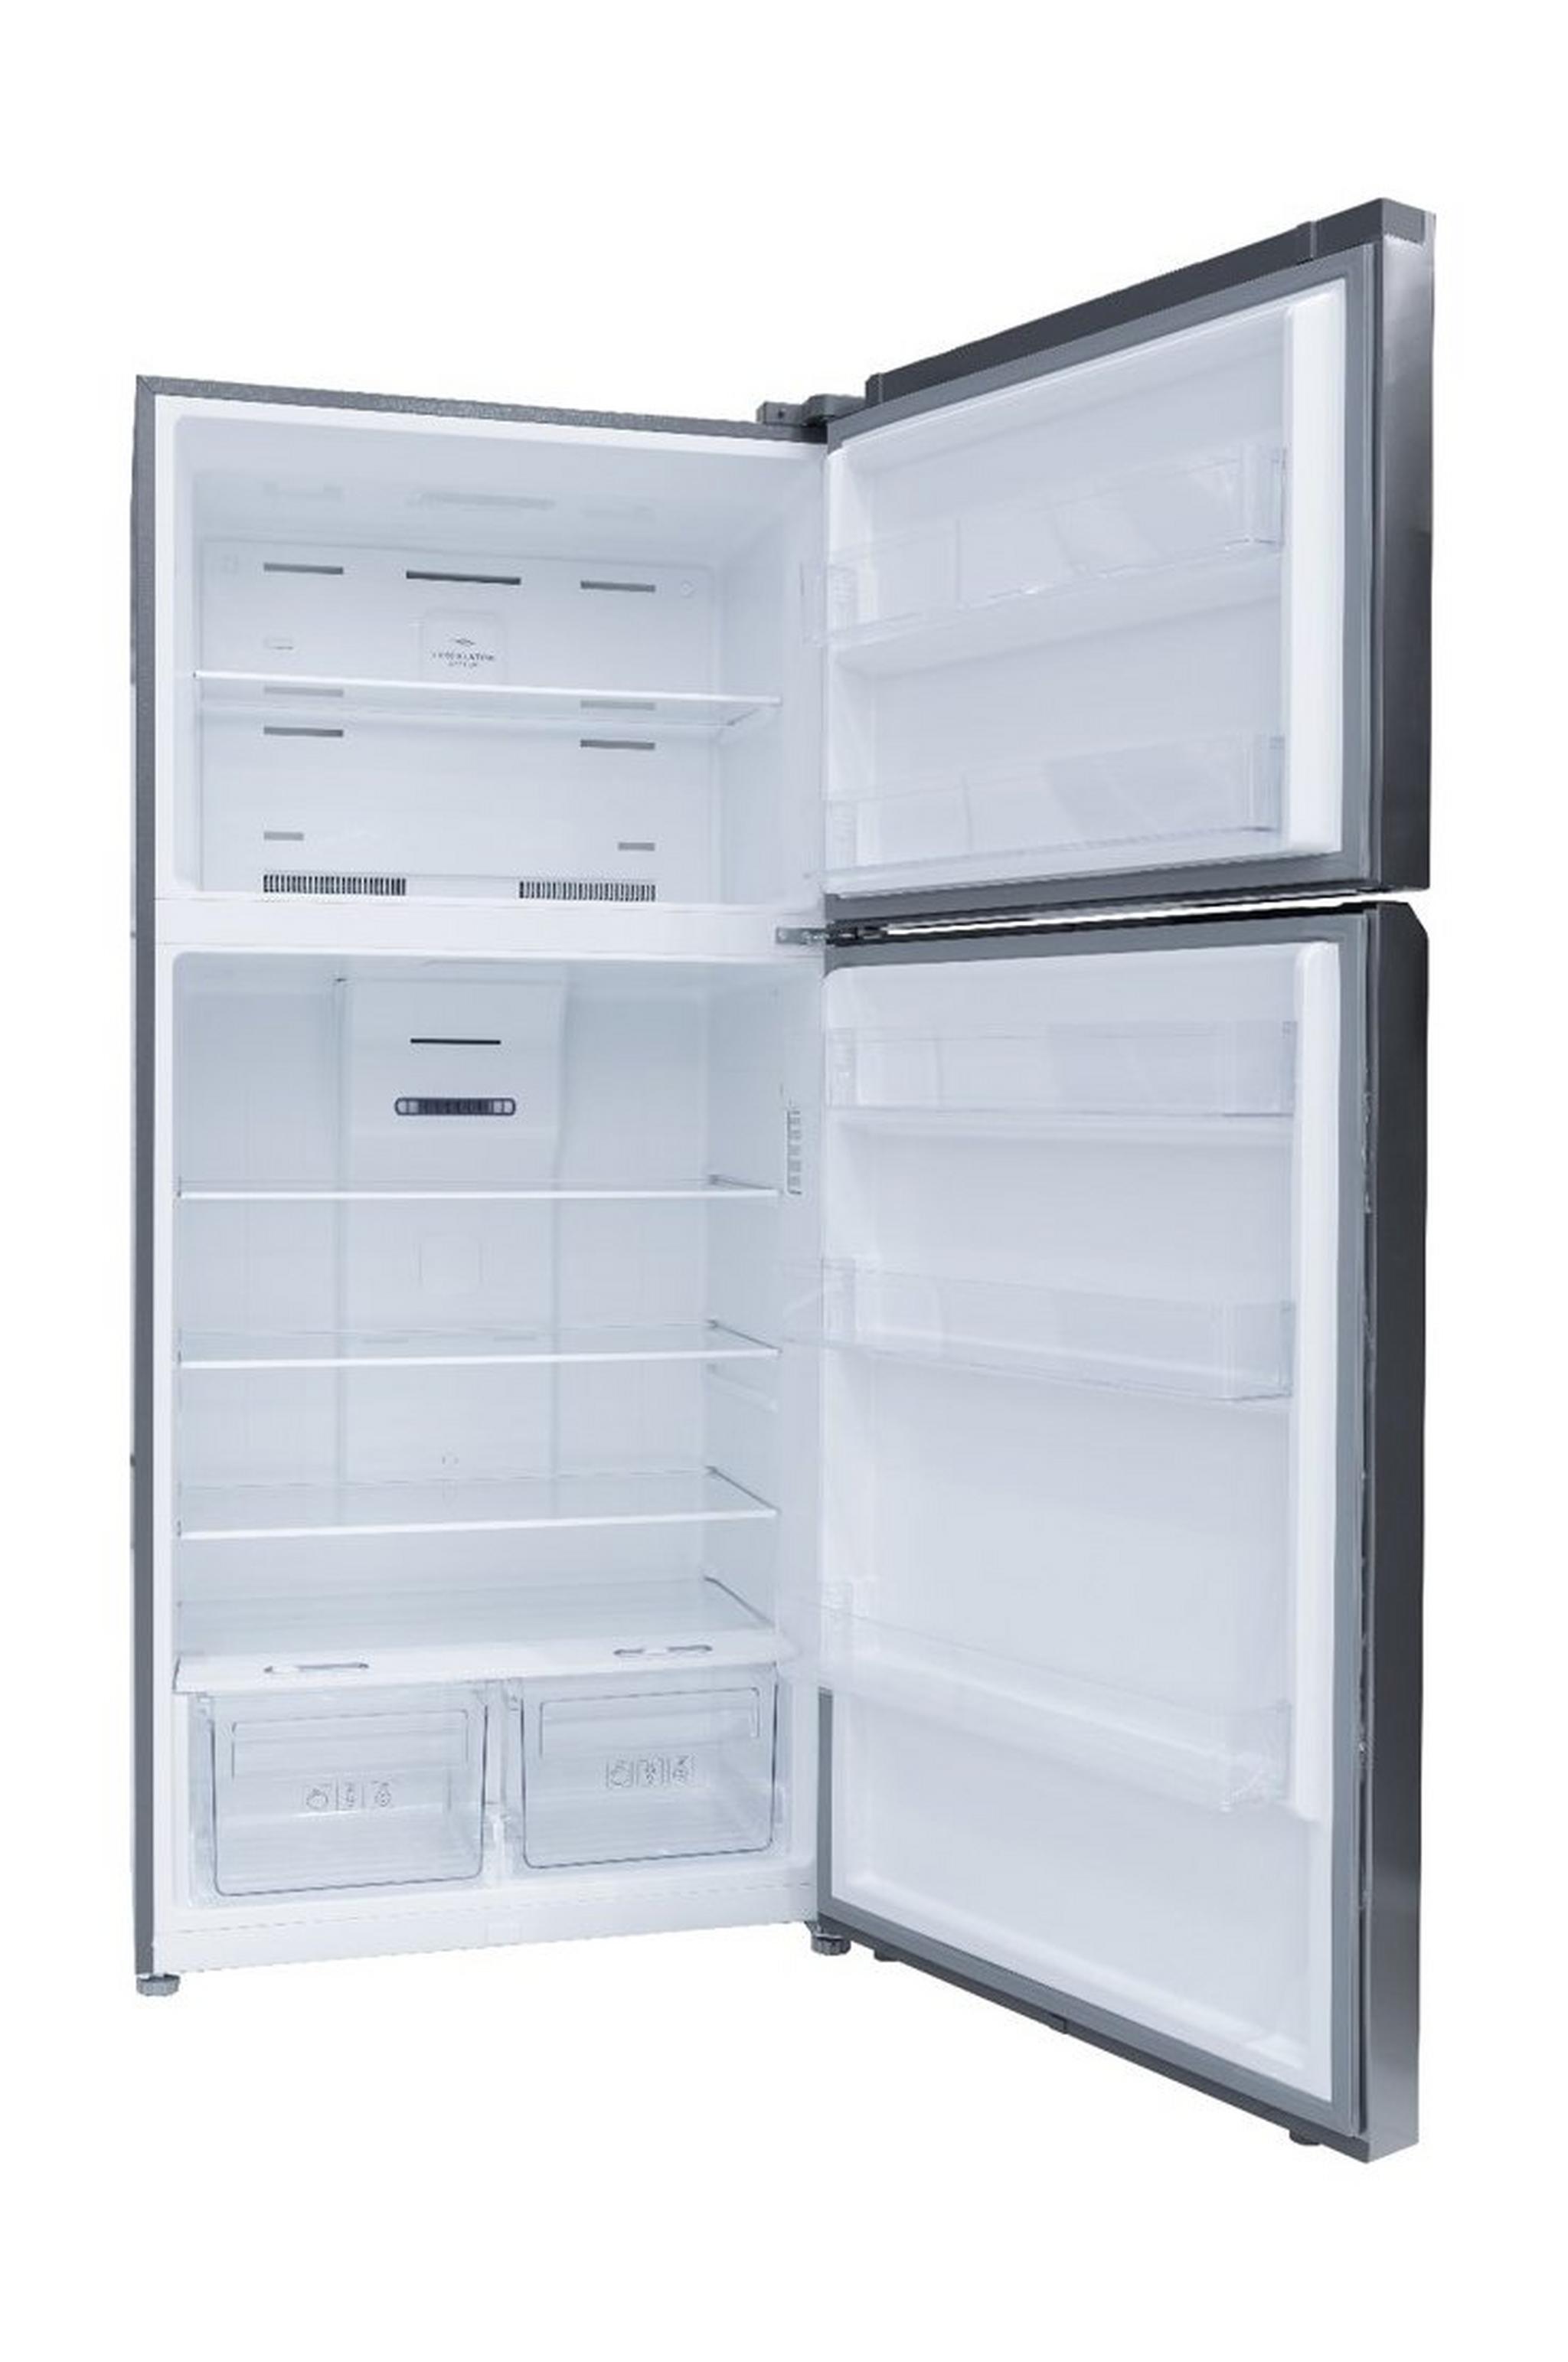 TCL Top Mount Refrigerator, 19CFT, 538-Liters, TRF-545WEX - Stainless Steel